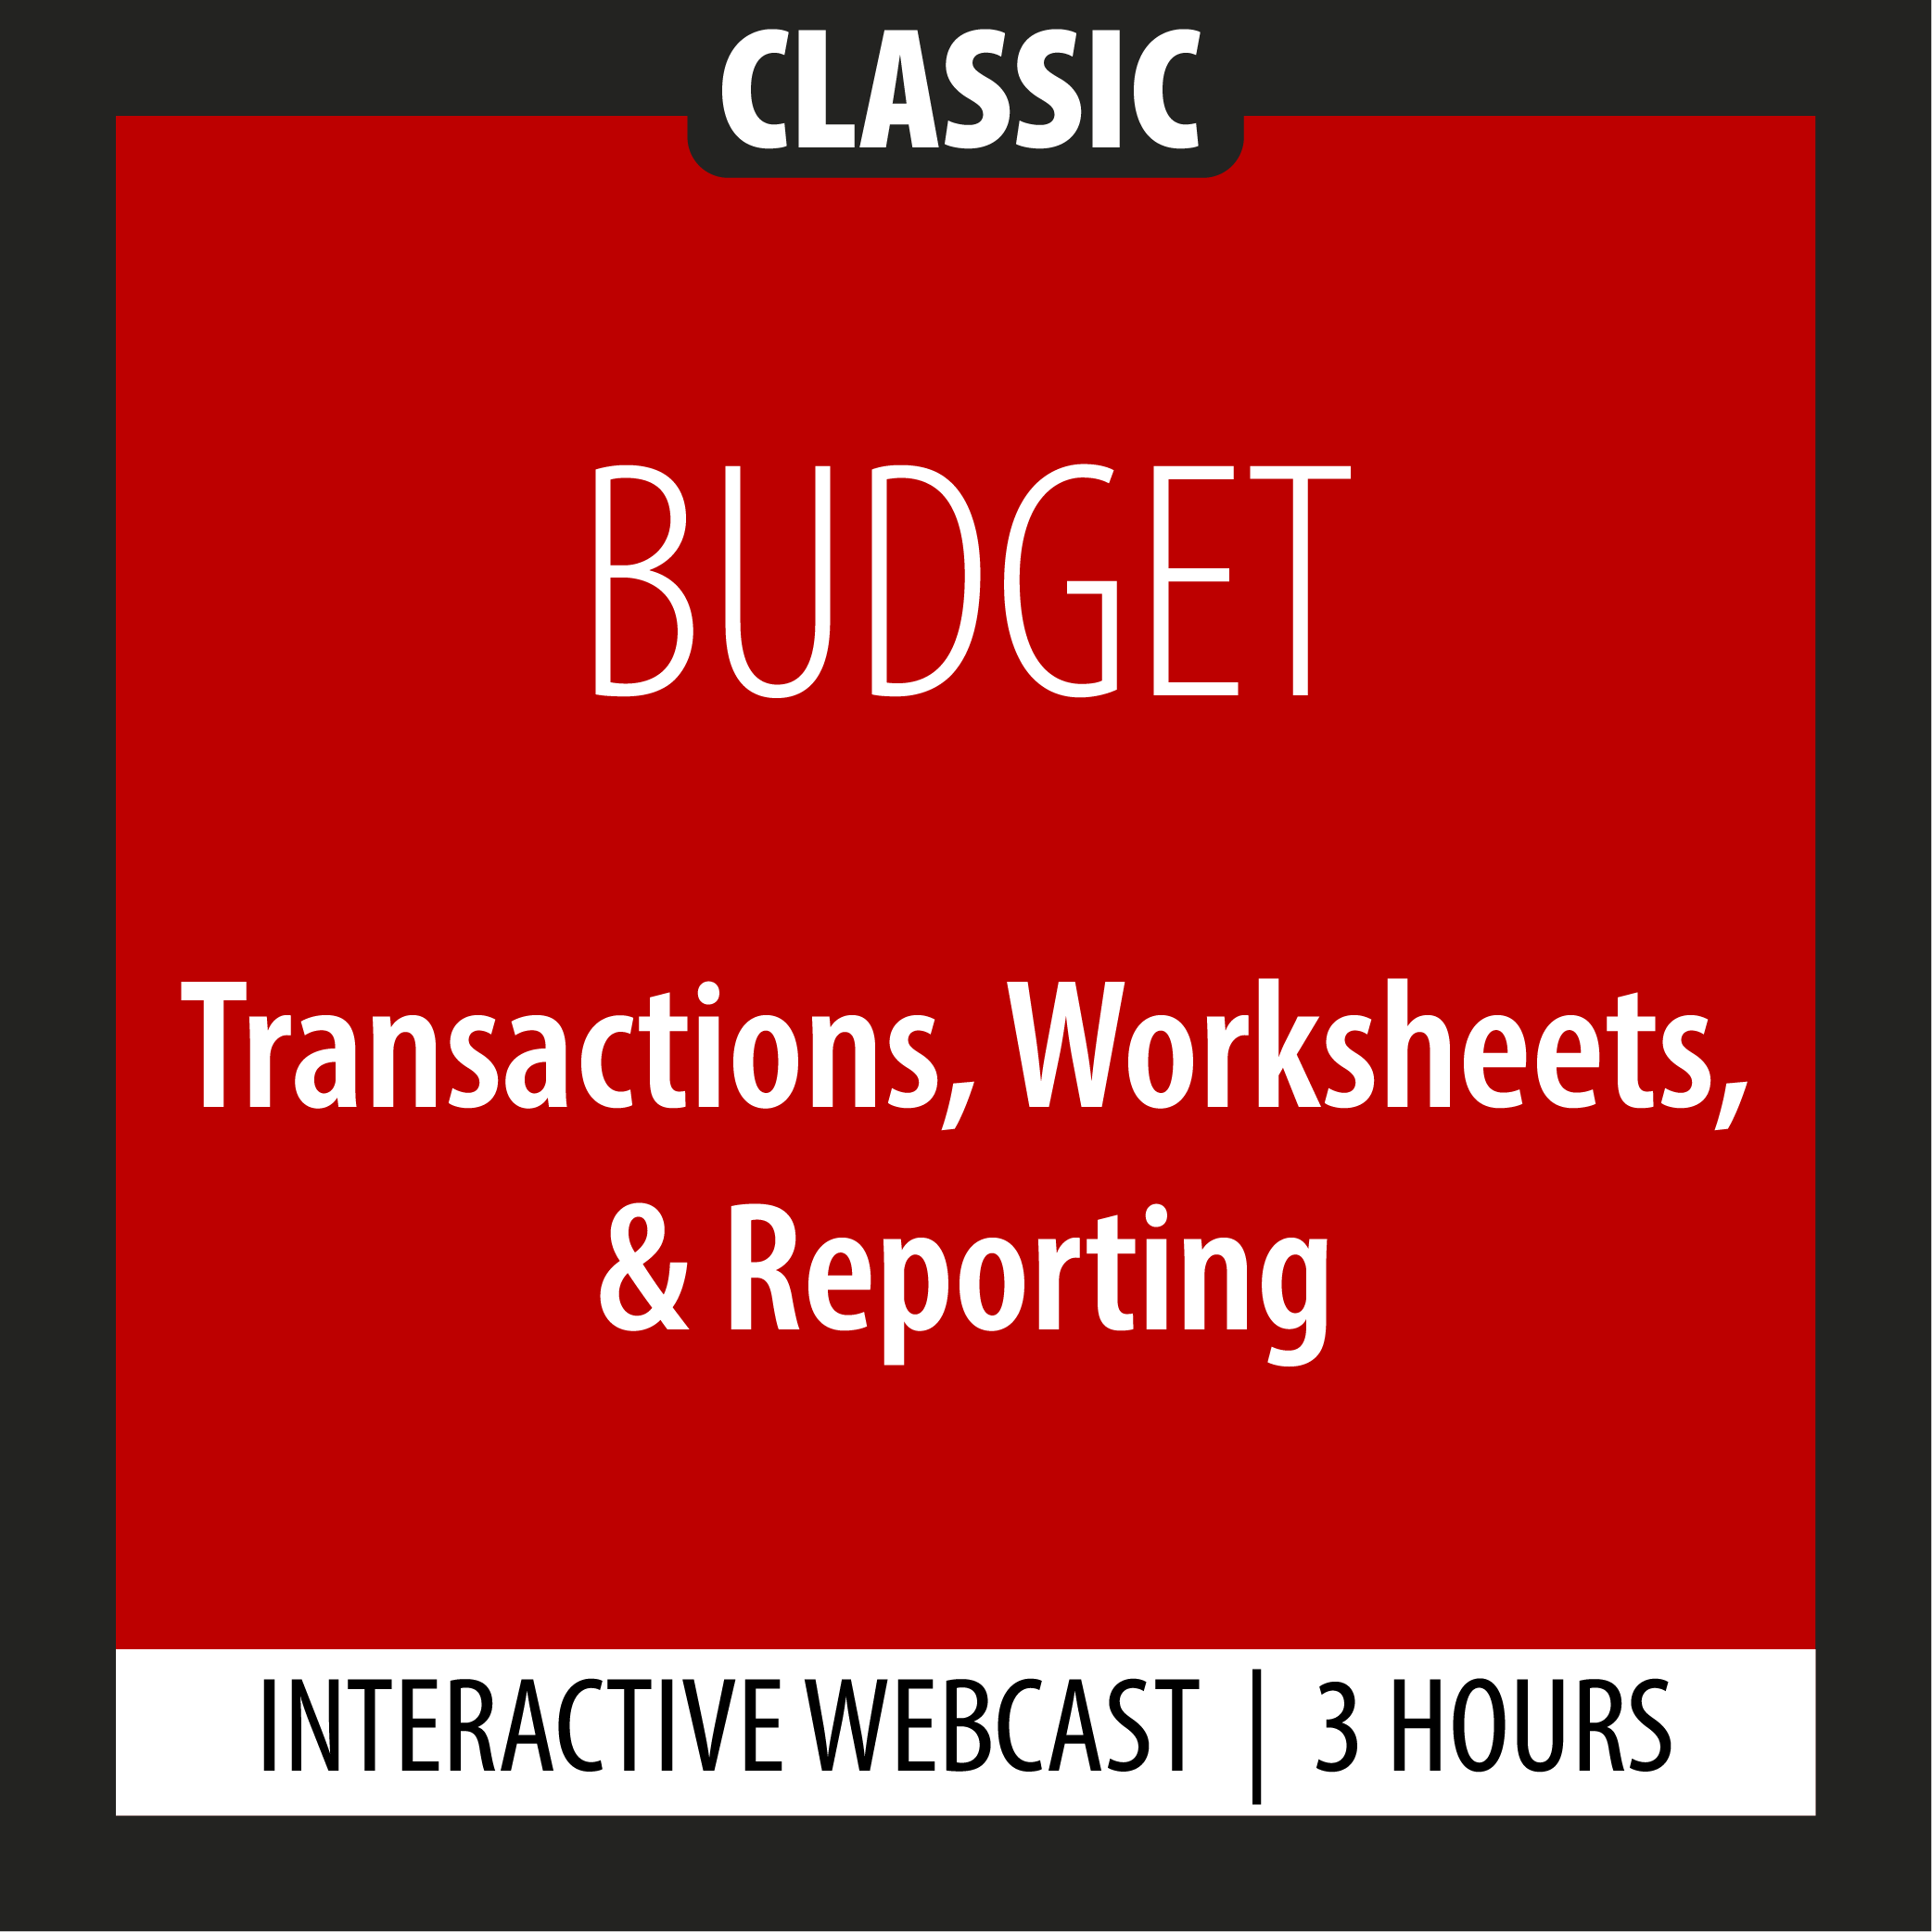 Classic - Budget - Transactions, Worksheets, & Reporting - Webcast - 3 Hours